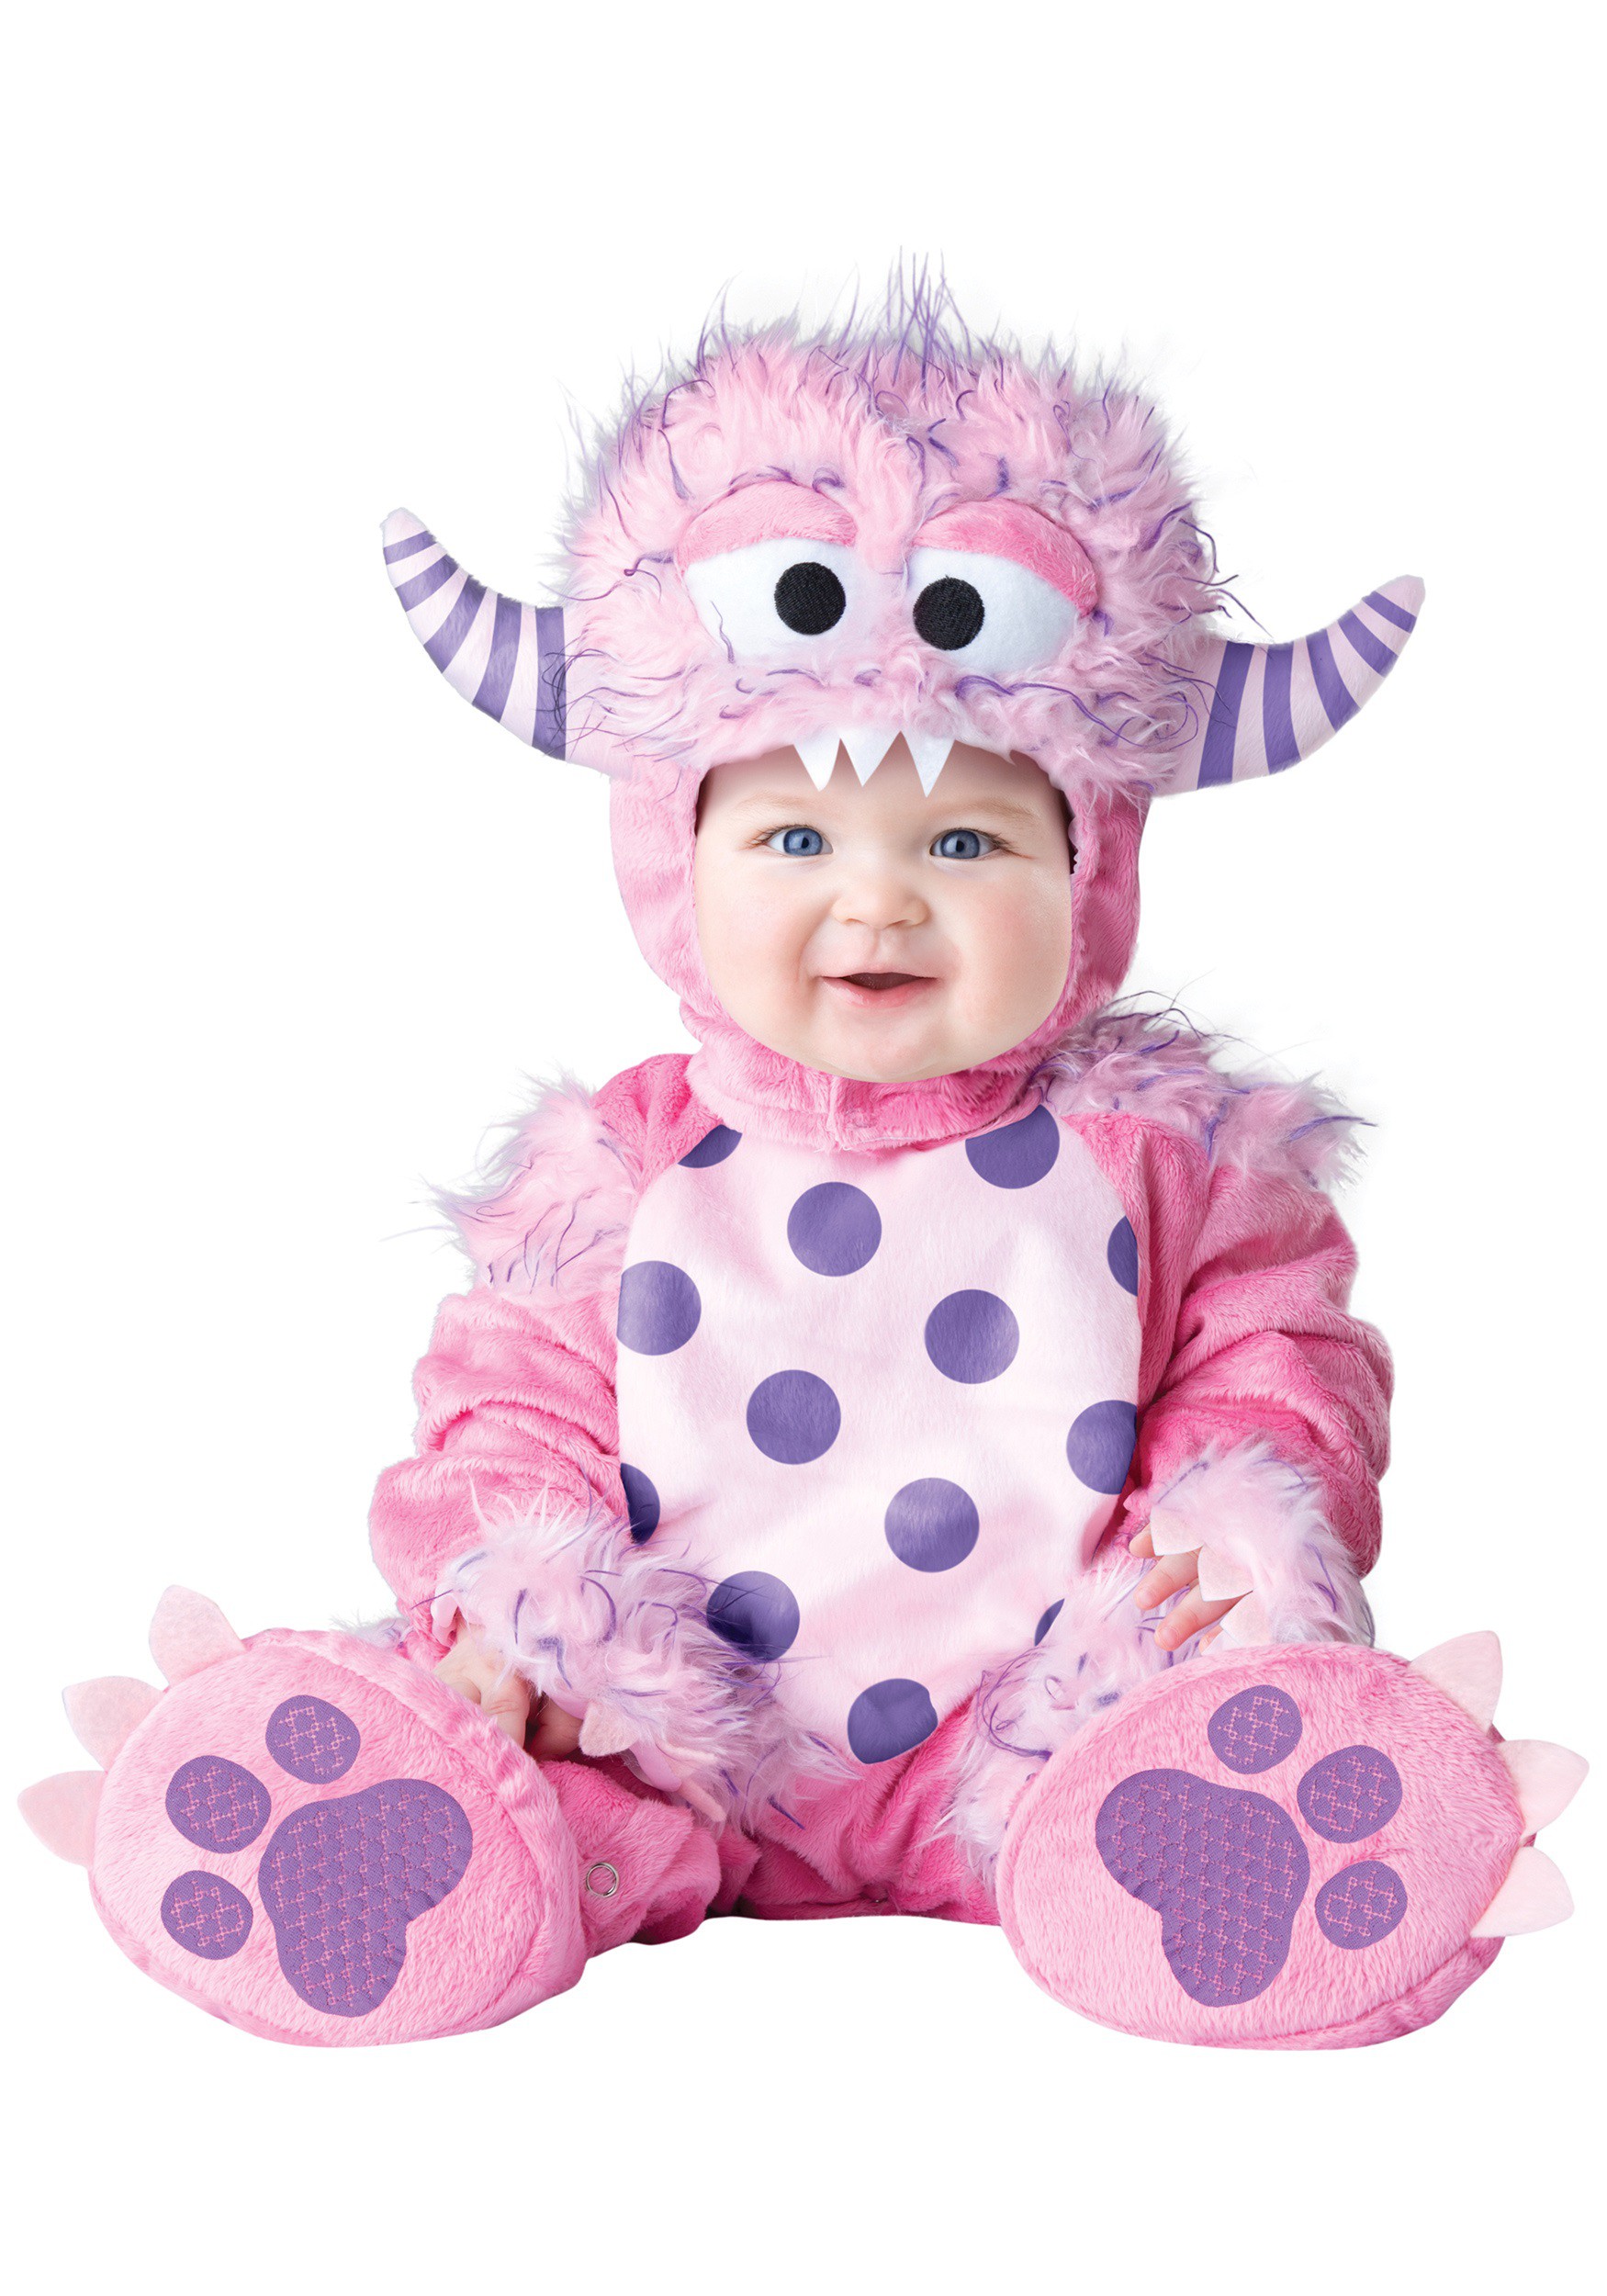 Image of Infant/Toddler Lil Pink Monster Costume ID IN6068-3T